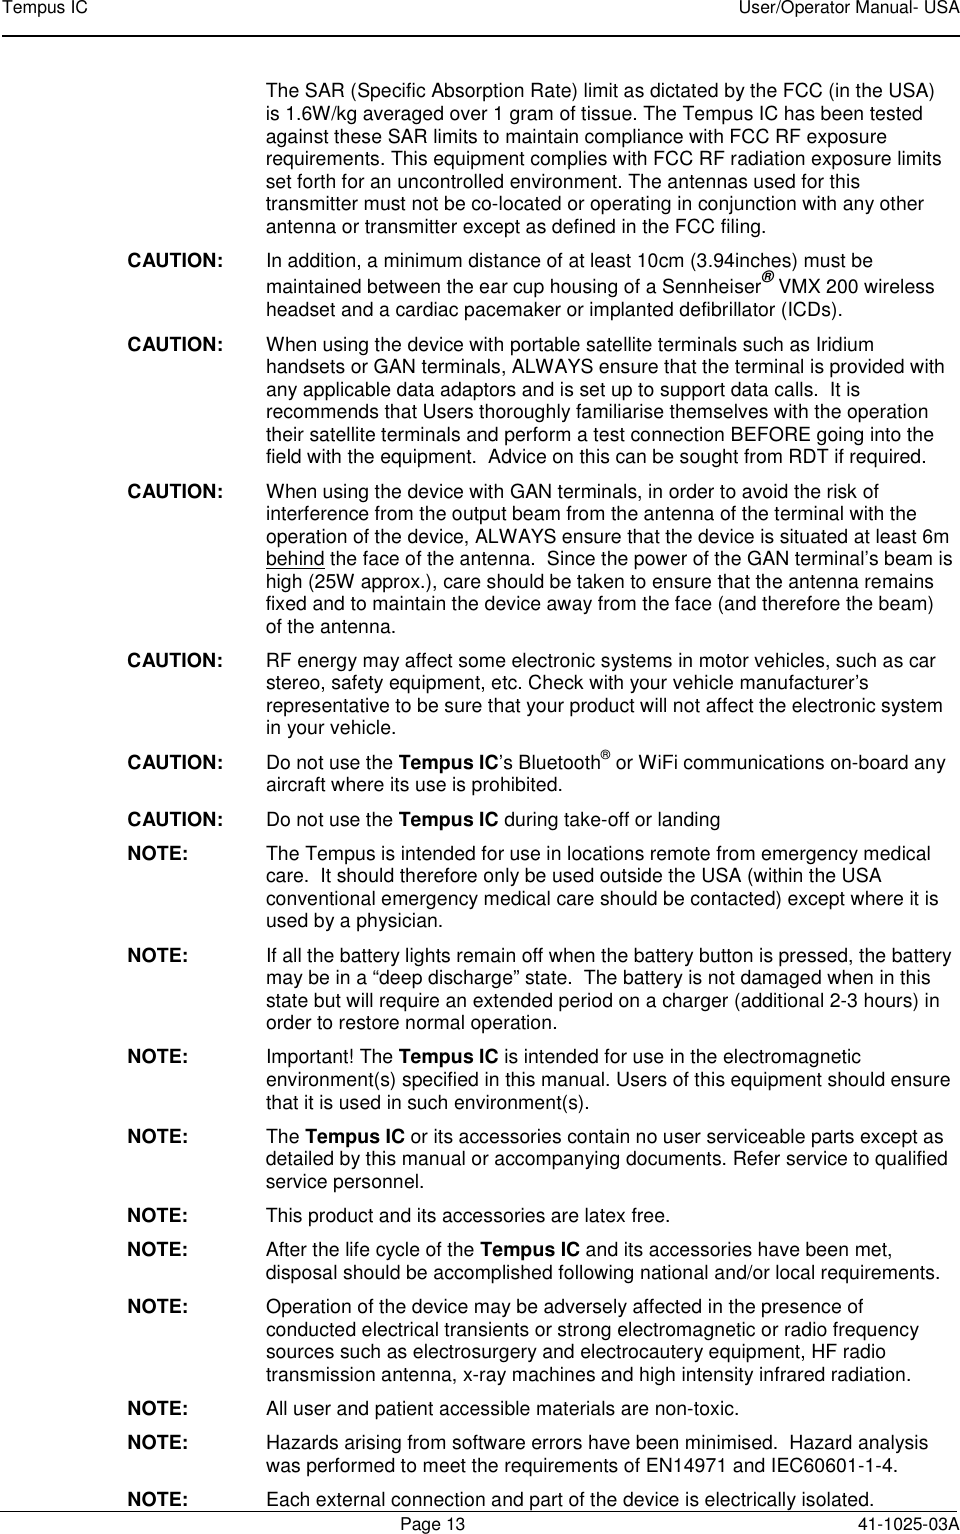 Tempus IC    User/Operator Manual- USA        Page 13  41-1025-03A  The SAR (Specific Absorption Rate) limit as dictated by the FCC (in the USA) is 1.6W/kg averaged over 1 gram of tissue. The Tempus IC has been tested against these SAR limits to maintain compliance with FCC RF exposure requirements. This equipment complies with FCC RF radiation exposure limits set forth for an uncontrolled environment. The antennas used for this transmitter must not be co-located or operating in conjunction with any other antenna or transmitter except as defined in the FCC filing. CAUTION:  In addition, a minimum distance of at least 10cm (3.94inches) must be maintained between the ear cup housing of a Sennheiser® VMX 200 wireless headset and a cardiac pacemaker or implanted defibrillator (ICDs). CAUTION:  When using the device with portable satellite terminals such as Iridium handsets or GAN terminals, ALWAYS ensure that the terminal is provided with any applicable data adaptors and is set up to support data calls.  It is recommends that Users thoroughly familiarise themselves with the operation their satellite terminals and perform a test connection BEFORE going into the field with the equipment.  Advice on this can be sought from RDT if required. CAUTION:  When using the device with GAN terminals, in order to avoid the risk of interference from the output beam from the antenna of the terminal with the operation of the device, ALWAYS ensure that the device is situated at least 6m behind the face of the antenna.  Since the power of the GAN terminal’s beam is high (25W approx.), care should be taken to ensure that the antenna remains fixed and to maintain the device away from the face (and therefore the beam) of the antenna. CAUTION:  RF energy may affect some electronic systems in motor vehicles, such as car stereo, safety equipment, etc. Check with your vehicle manufacturer’s representative to be sure that your product will not affect the electronic system in your vehicle.  CAUTION:  Do not use the Tempus IC’s Bluetooth® or WiFi communications on-board any aircraft where its use is prohibited. CAUTION:  Do not use the Tempus IC during take-off or landing NOTE:  The Tempus is intended for use in locations remote from emergency medical care.  It should therefore only be used outside the USA (within the USA conventional emergency medical care should be contacted) except where it is used by a physician. NOTE:  If all the battery lights remain off when the battery button is pressed, the battery may be in a “deep discharge” state.  The battery is not damaged when in this state but will require an extended period on a charger (additional 2-3 hours) in order to restore normal operation. NOTE:  Important! The Tempus IC is intended for use in the electromagnetic environment(s) specified in this manual. Users of this equipment should ensure that it is used in such environment(s).  NOTE:  The Tempus IC or its accessories contain no user serviceable parts except as detailed by this manual or accompanying documents. Refer service to qualified service personnel. NOTE:  This product and its accessories are latex free. NOTE:  After the life cycle of the Tempus IC and its accessories have been met, disposal should be accomplished following national and/or local requirements. NOTE:  Operation of the device may be adversely affected in the presence of conducted electrical transients or strong electromagnetic or radio frequency sources such as electrosurgery and electrocautery equipment, HF radio transmission antenna, x-ray machines and high intensity infrared radiation.  NOTE:  All user and patient accessible materials are non-toxic. NOTE:  Hazards arising from software errors have been minimised.  Hazard analysis was performed to meet the requirements of EN14971 and IEC60601-1-4. NOTE:  Each external connection and part of the device is electrically isolated.   